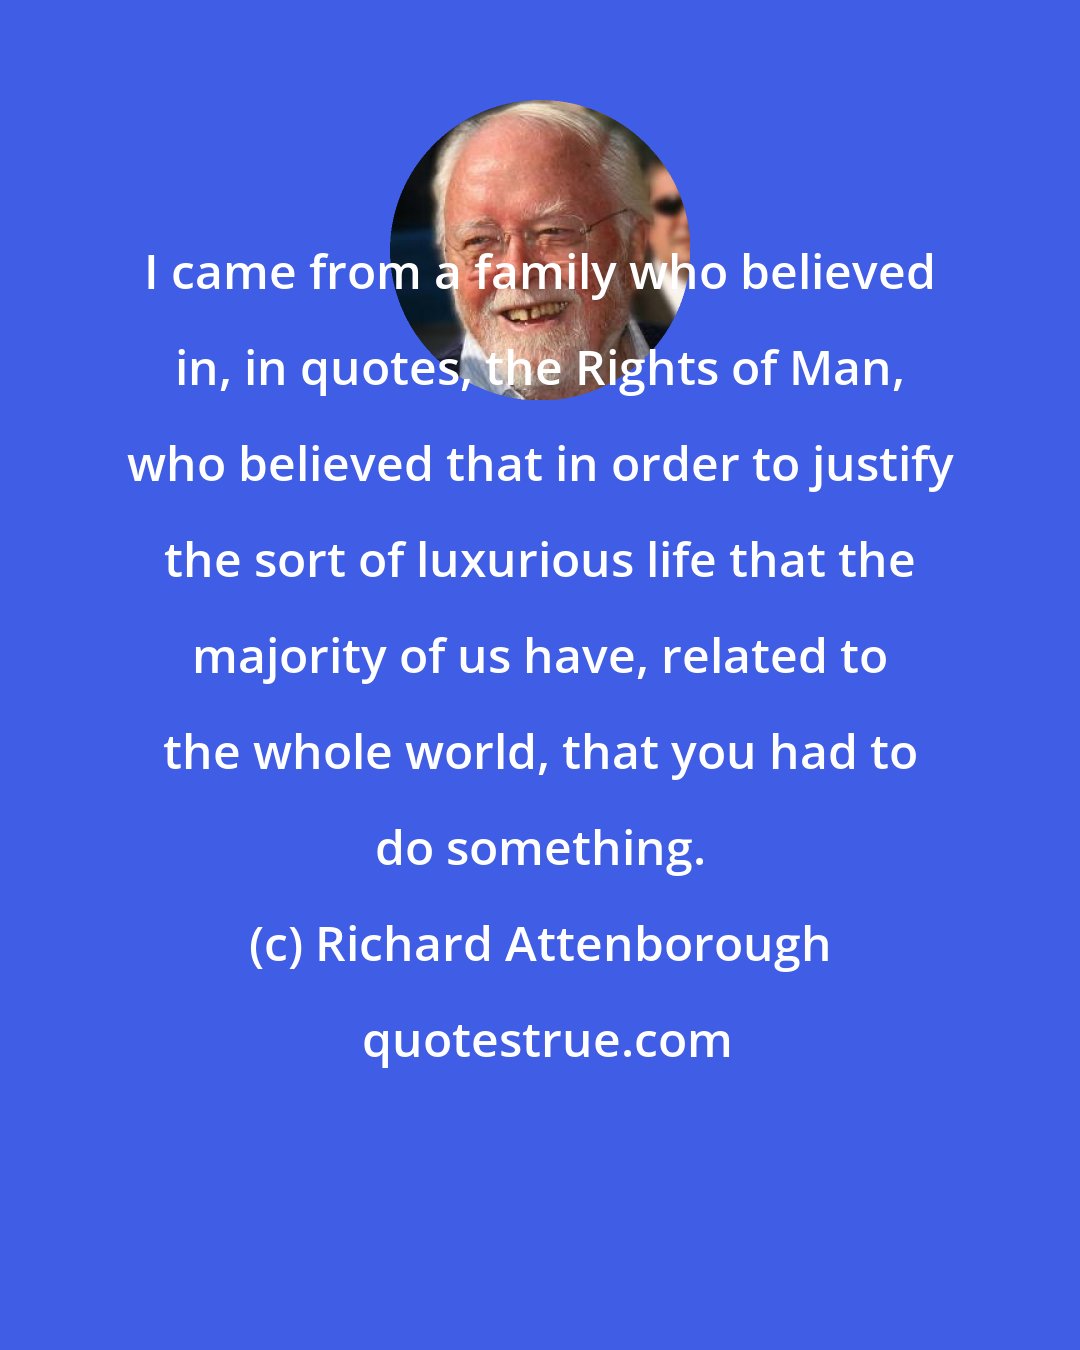 Richard Attenborough: I came from a family who believed in, in quotes, the Rights of Man, who believed that in order to justify the sort of luxurious life that the majority of us have, related to the whole world, that you had to do something.